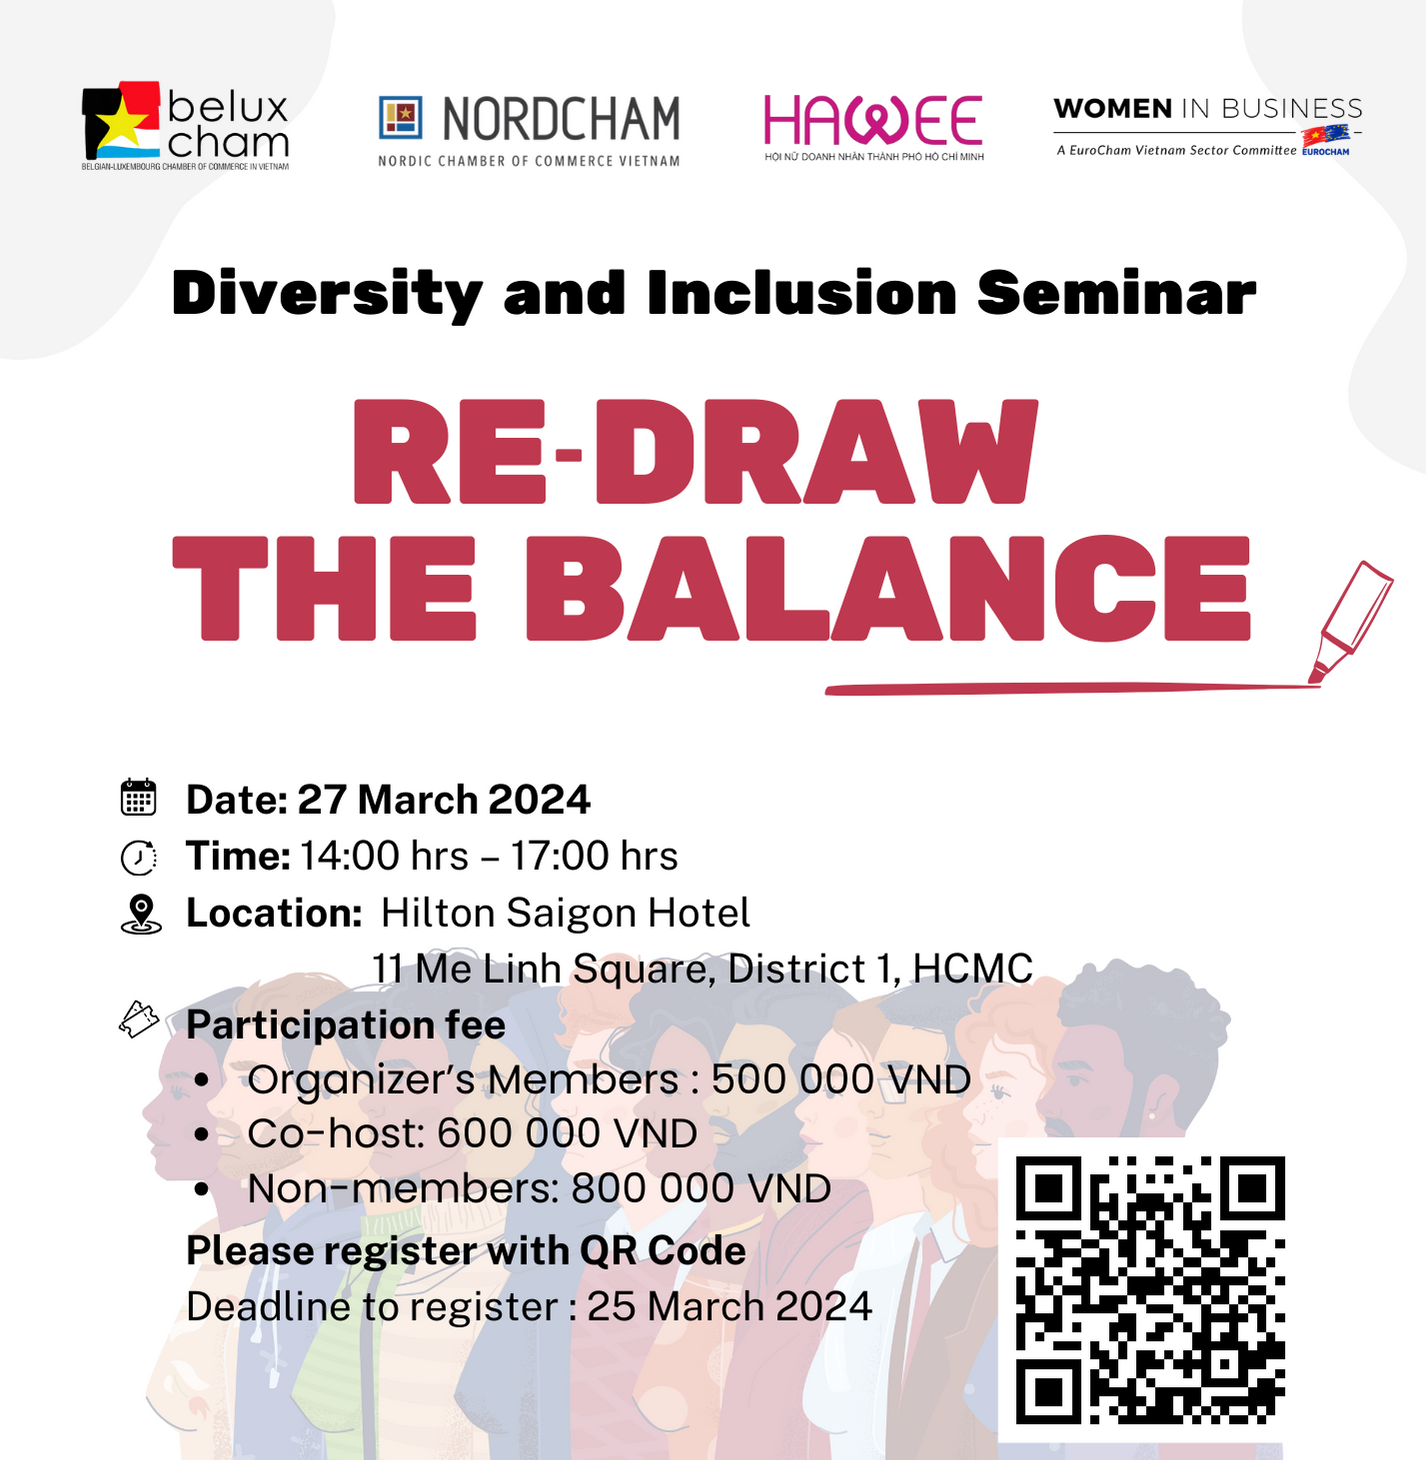 Diversity and Inclusion Seminar “Re-Draw The Balance”